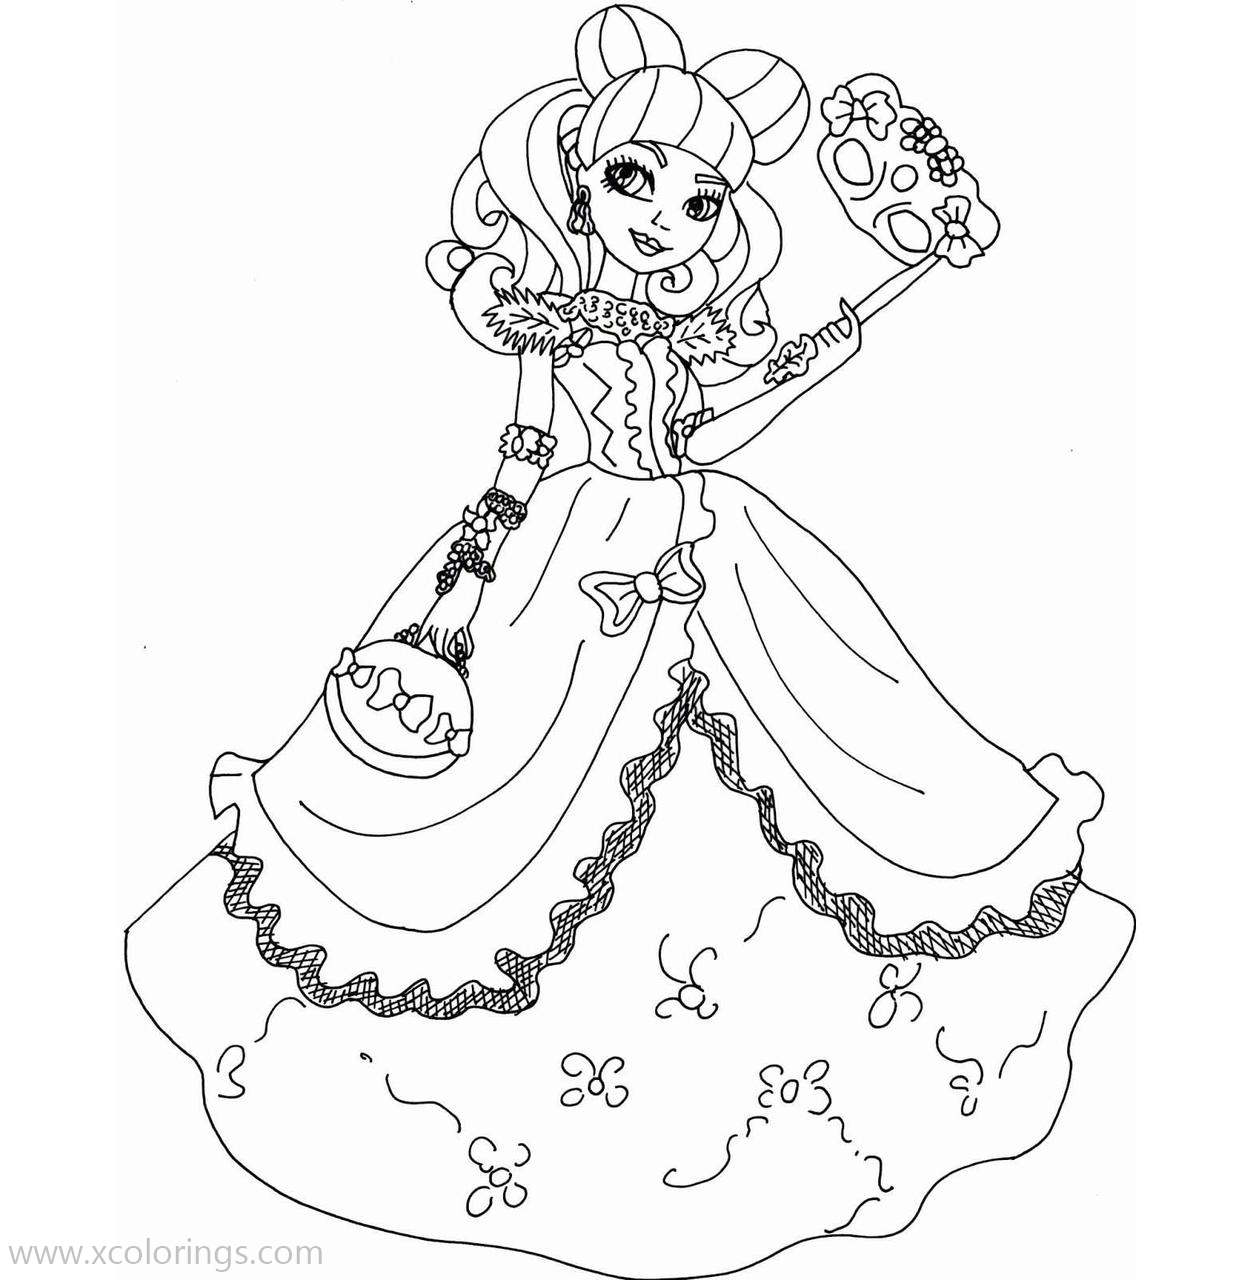 Free Ever After High Coloring Pages Masquerade Party printable